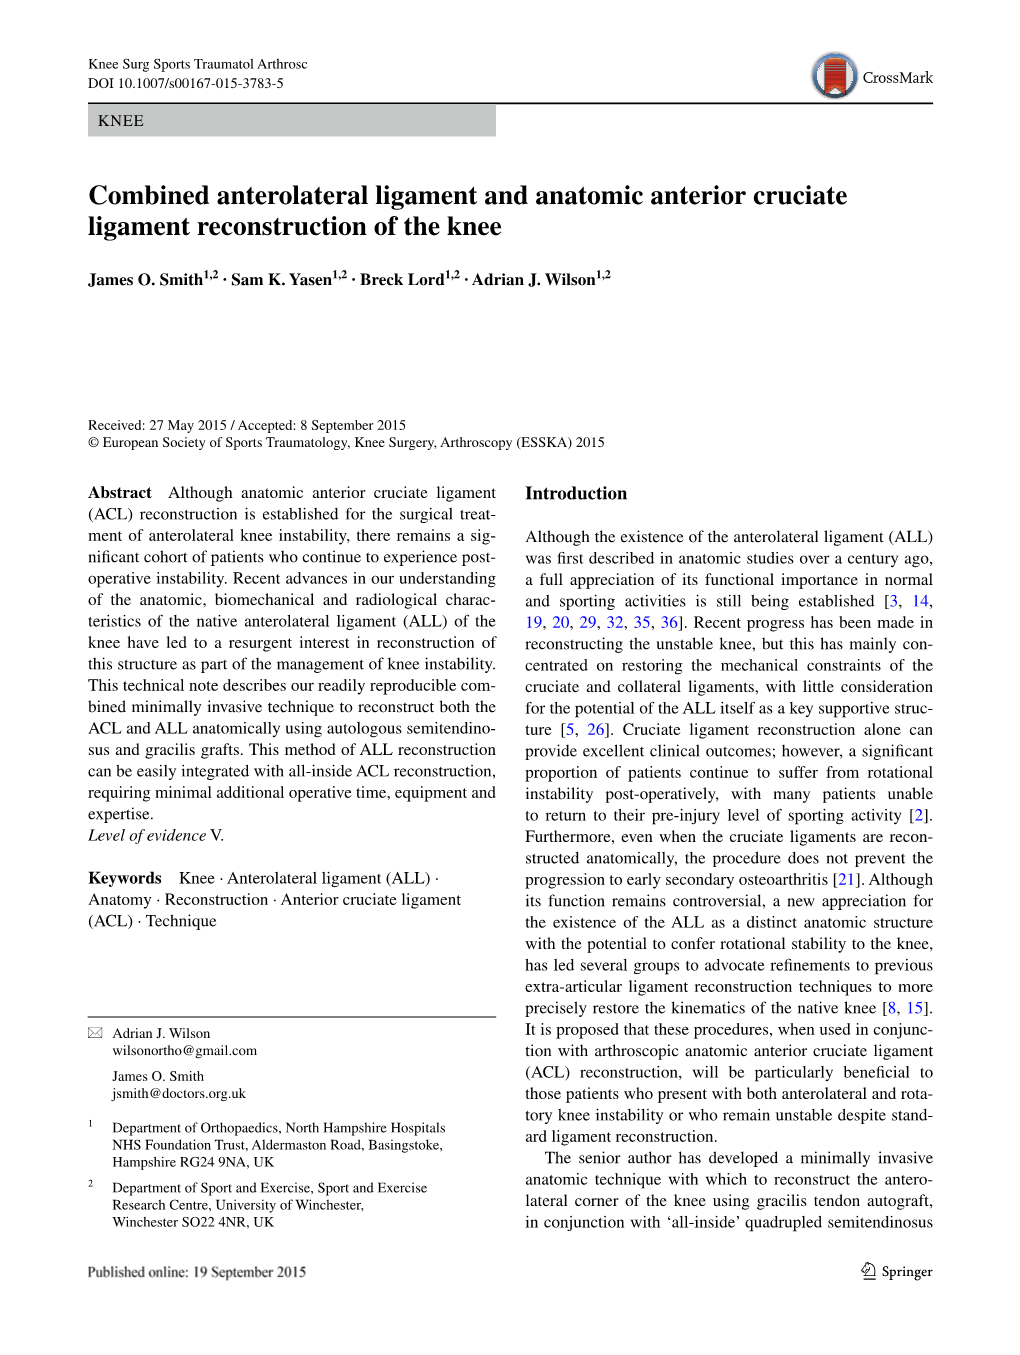 Combined Anterolateral Ligament and Anatomic Anterior Cruciate Ligament Reconstruction of the Knee